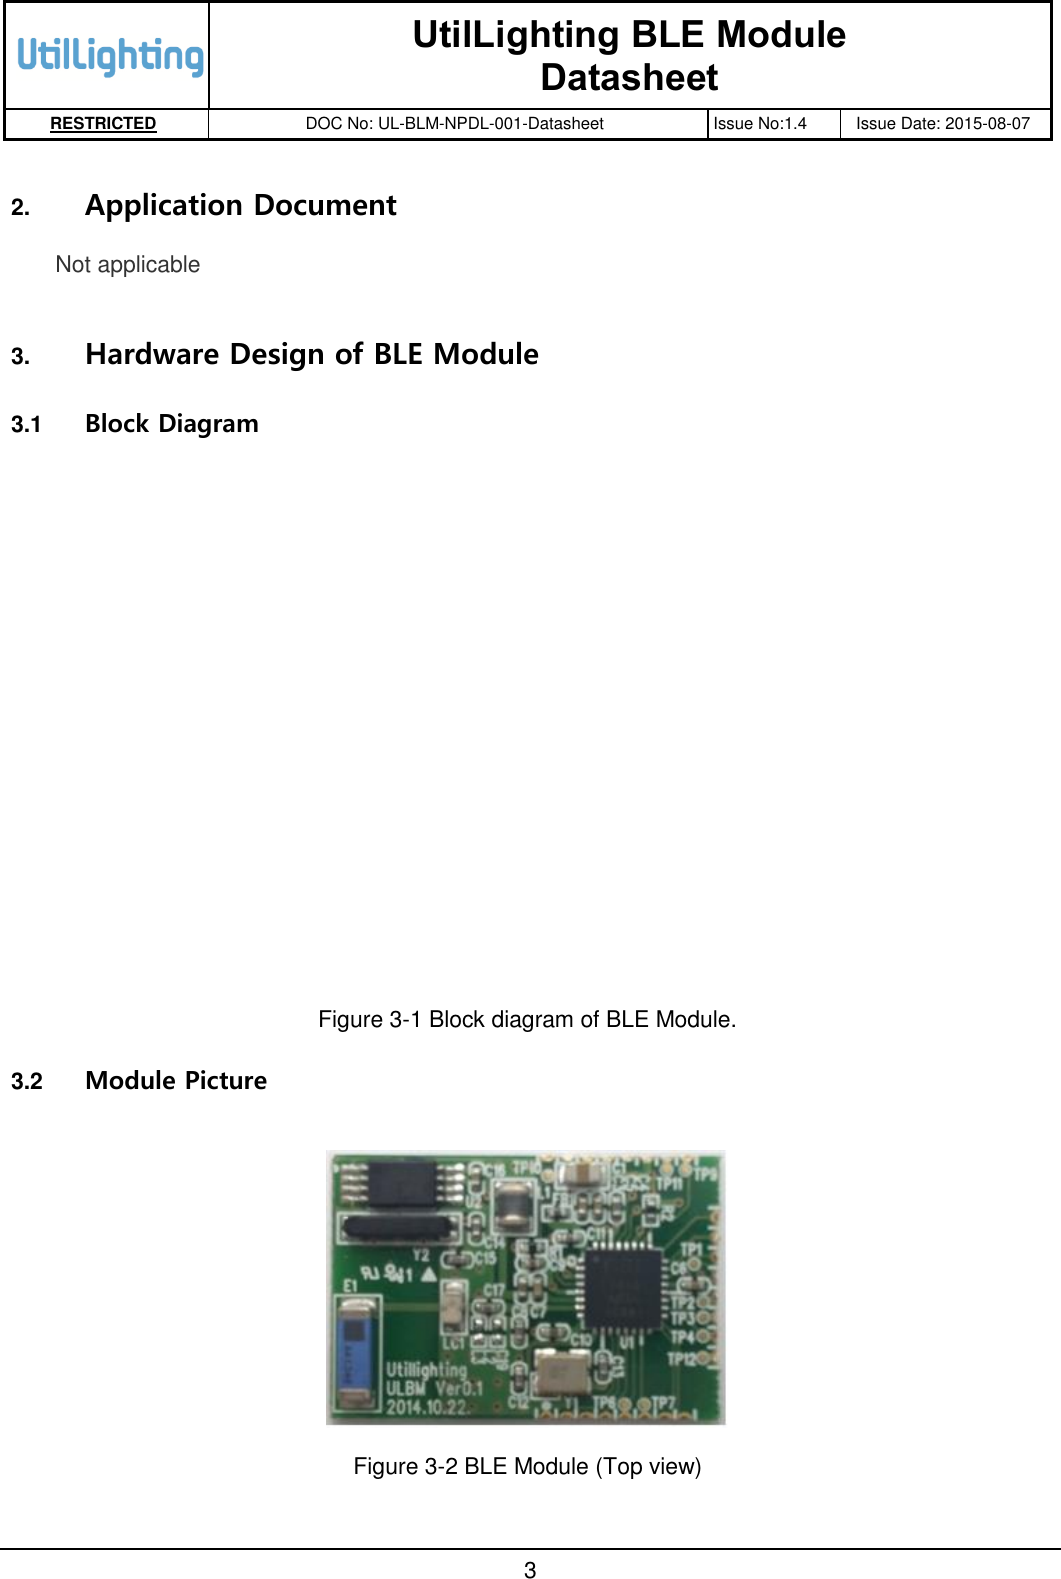   UtilLighting BLE Module Datasheet RESTRICTED DOC No: UL-BLM-NPDL-001-Datasheet Issue No:1.4 Issue Date: 2015-08-07       3  2. Application Document Not applicable  3. Hardware Design of BLE Module  3.1  Block Diagram            Figure 3-1 Block diagram of BLE Module. 3.2  Module Picture   Figure 3-2 BLE Module (Top view) 